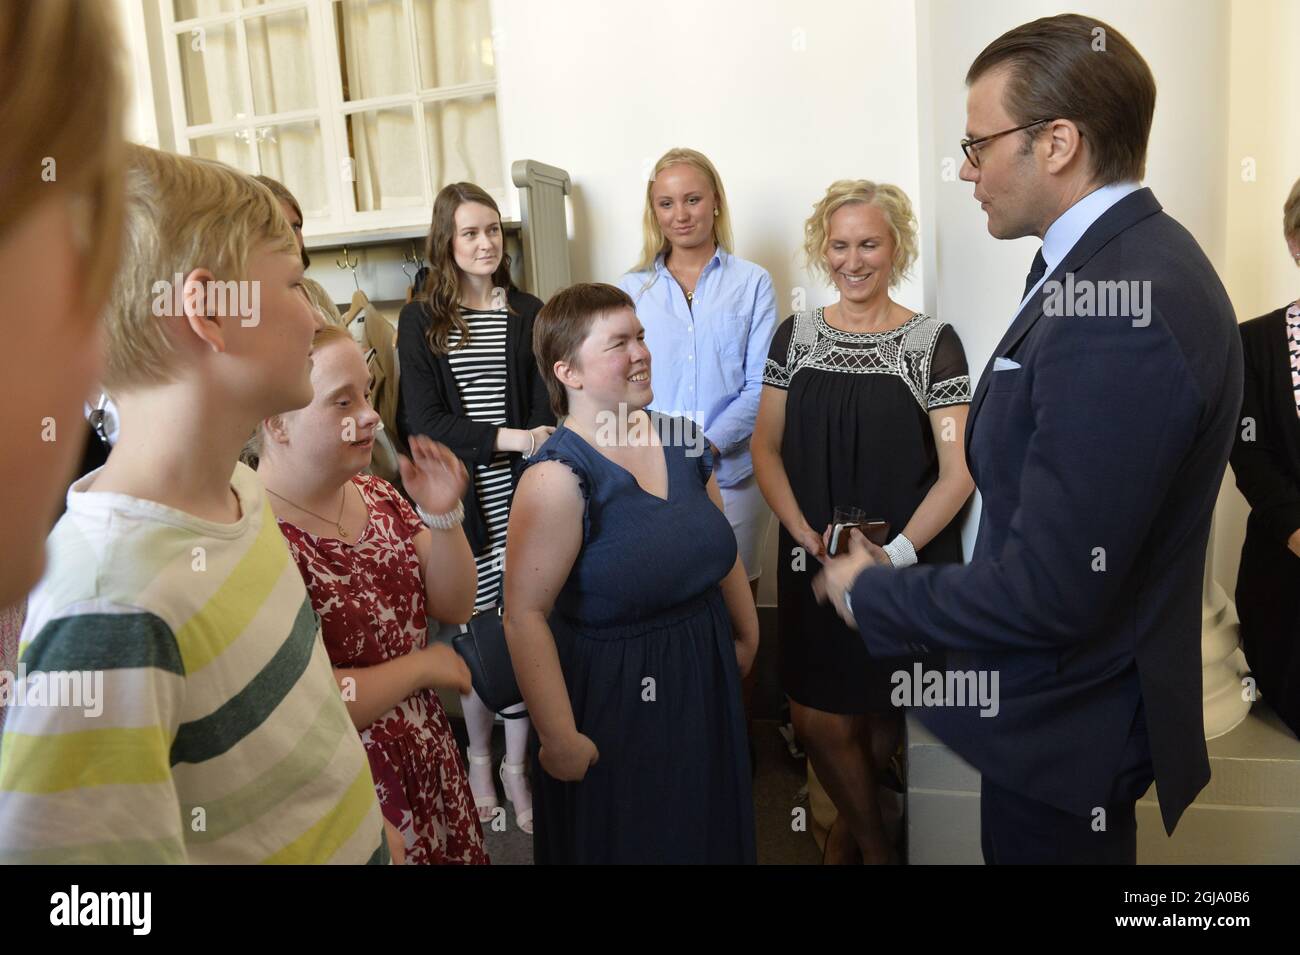 STOCKHOLM 2016-05-23 Prince Daniel are seen with actors of the Glada Hudik theatre during a ceremony at the Royal Palace in Stockholm, Sweden, May 23, 2016. 'Glada Hudik Theatre is a municipal activity in accordance with the LSS (The Swedish Act Concerning Support and Service for Persons with Certain Functional disabilities) a group consisting of both intellectually disabled and normally disabled actors. ' Foto Jonas Ekstromer / TT / kod 10030  Stock Photo